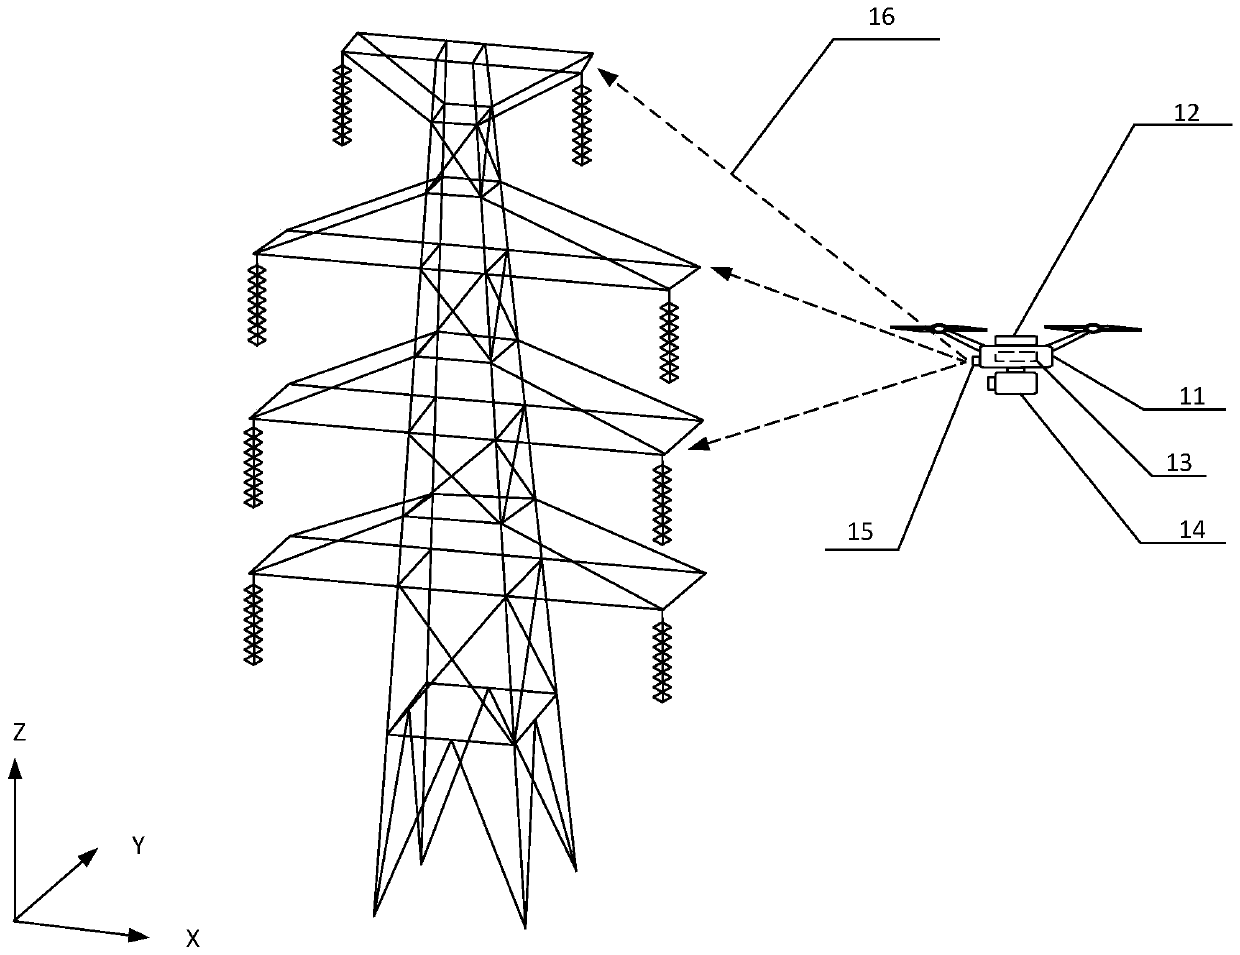 Pole tower model matching and visual navigation-based power unmanned aerial vehicle and inspection method